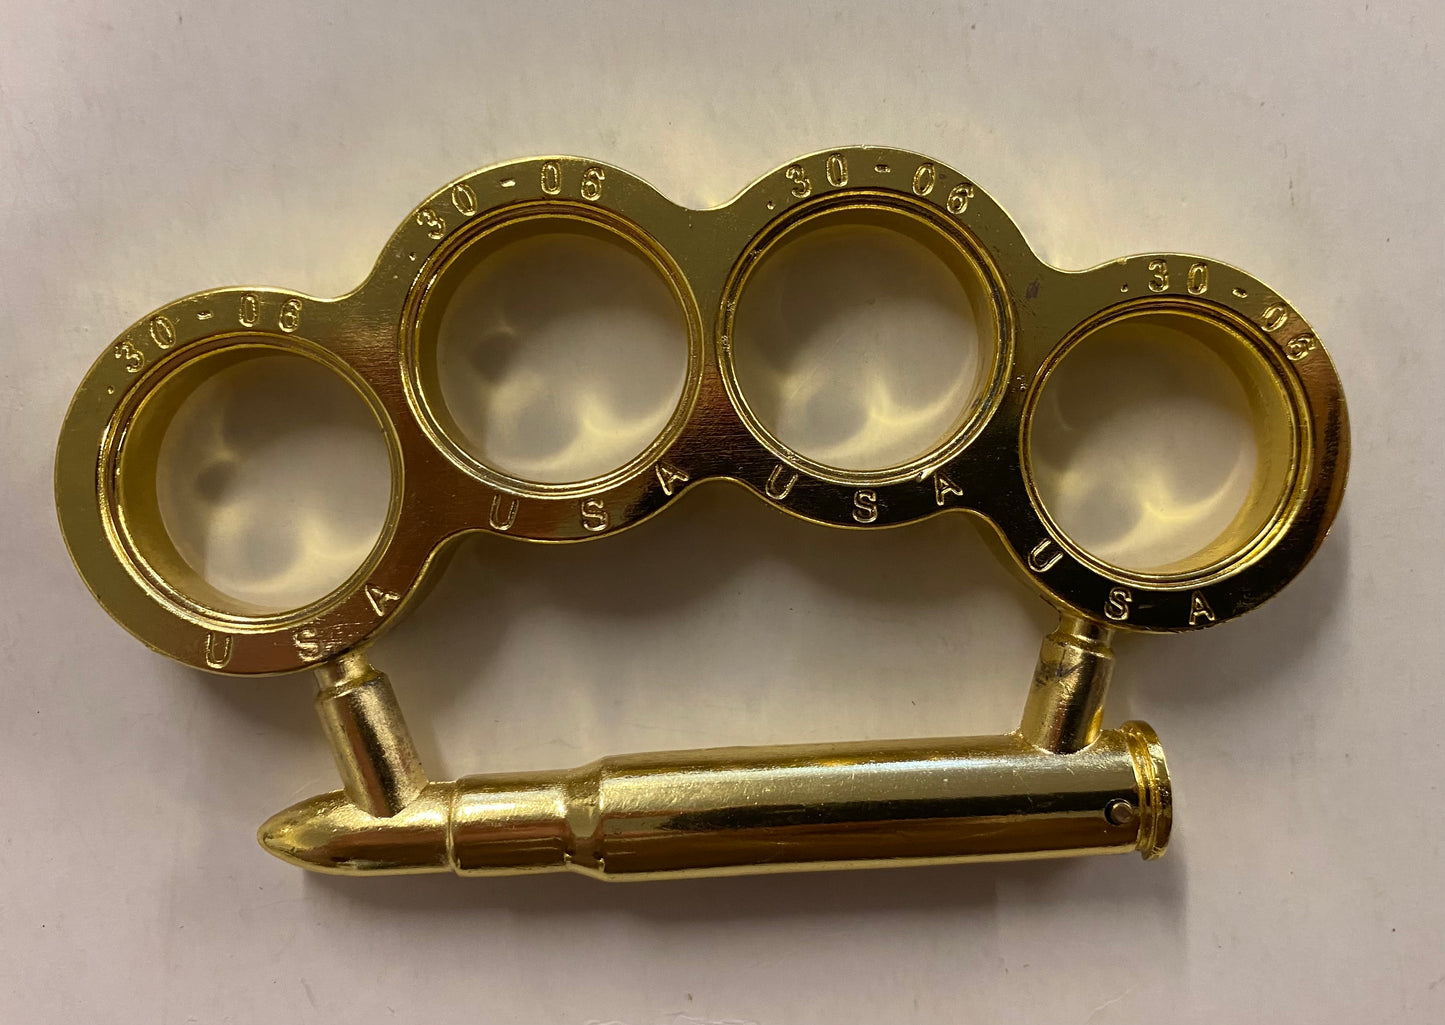 Brass Knuckles with Knife